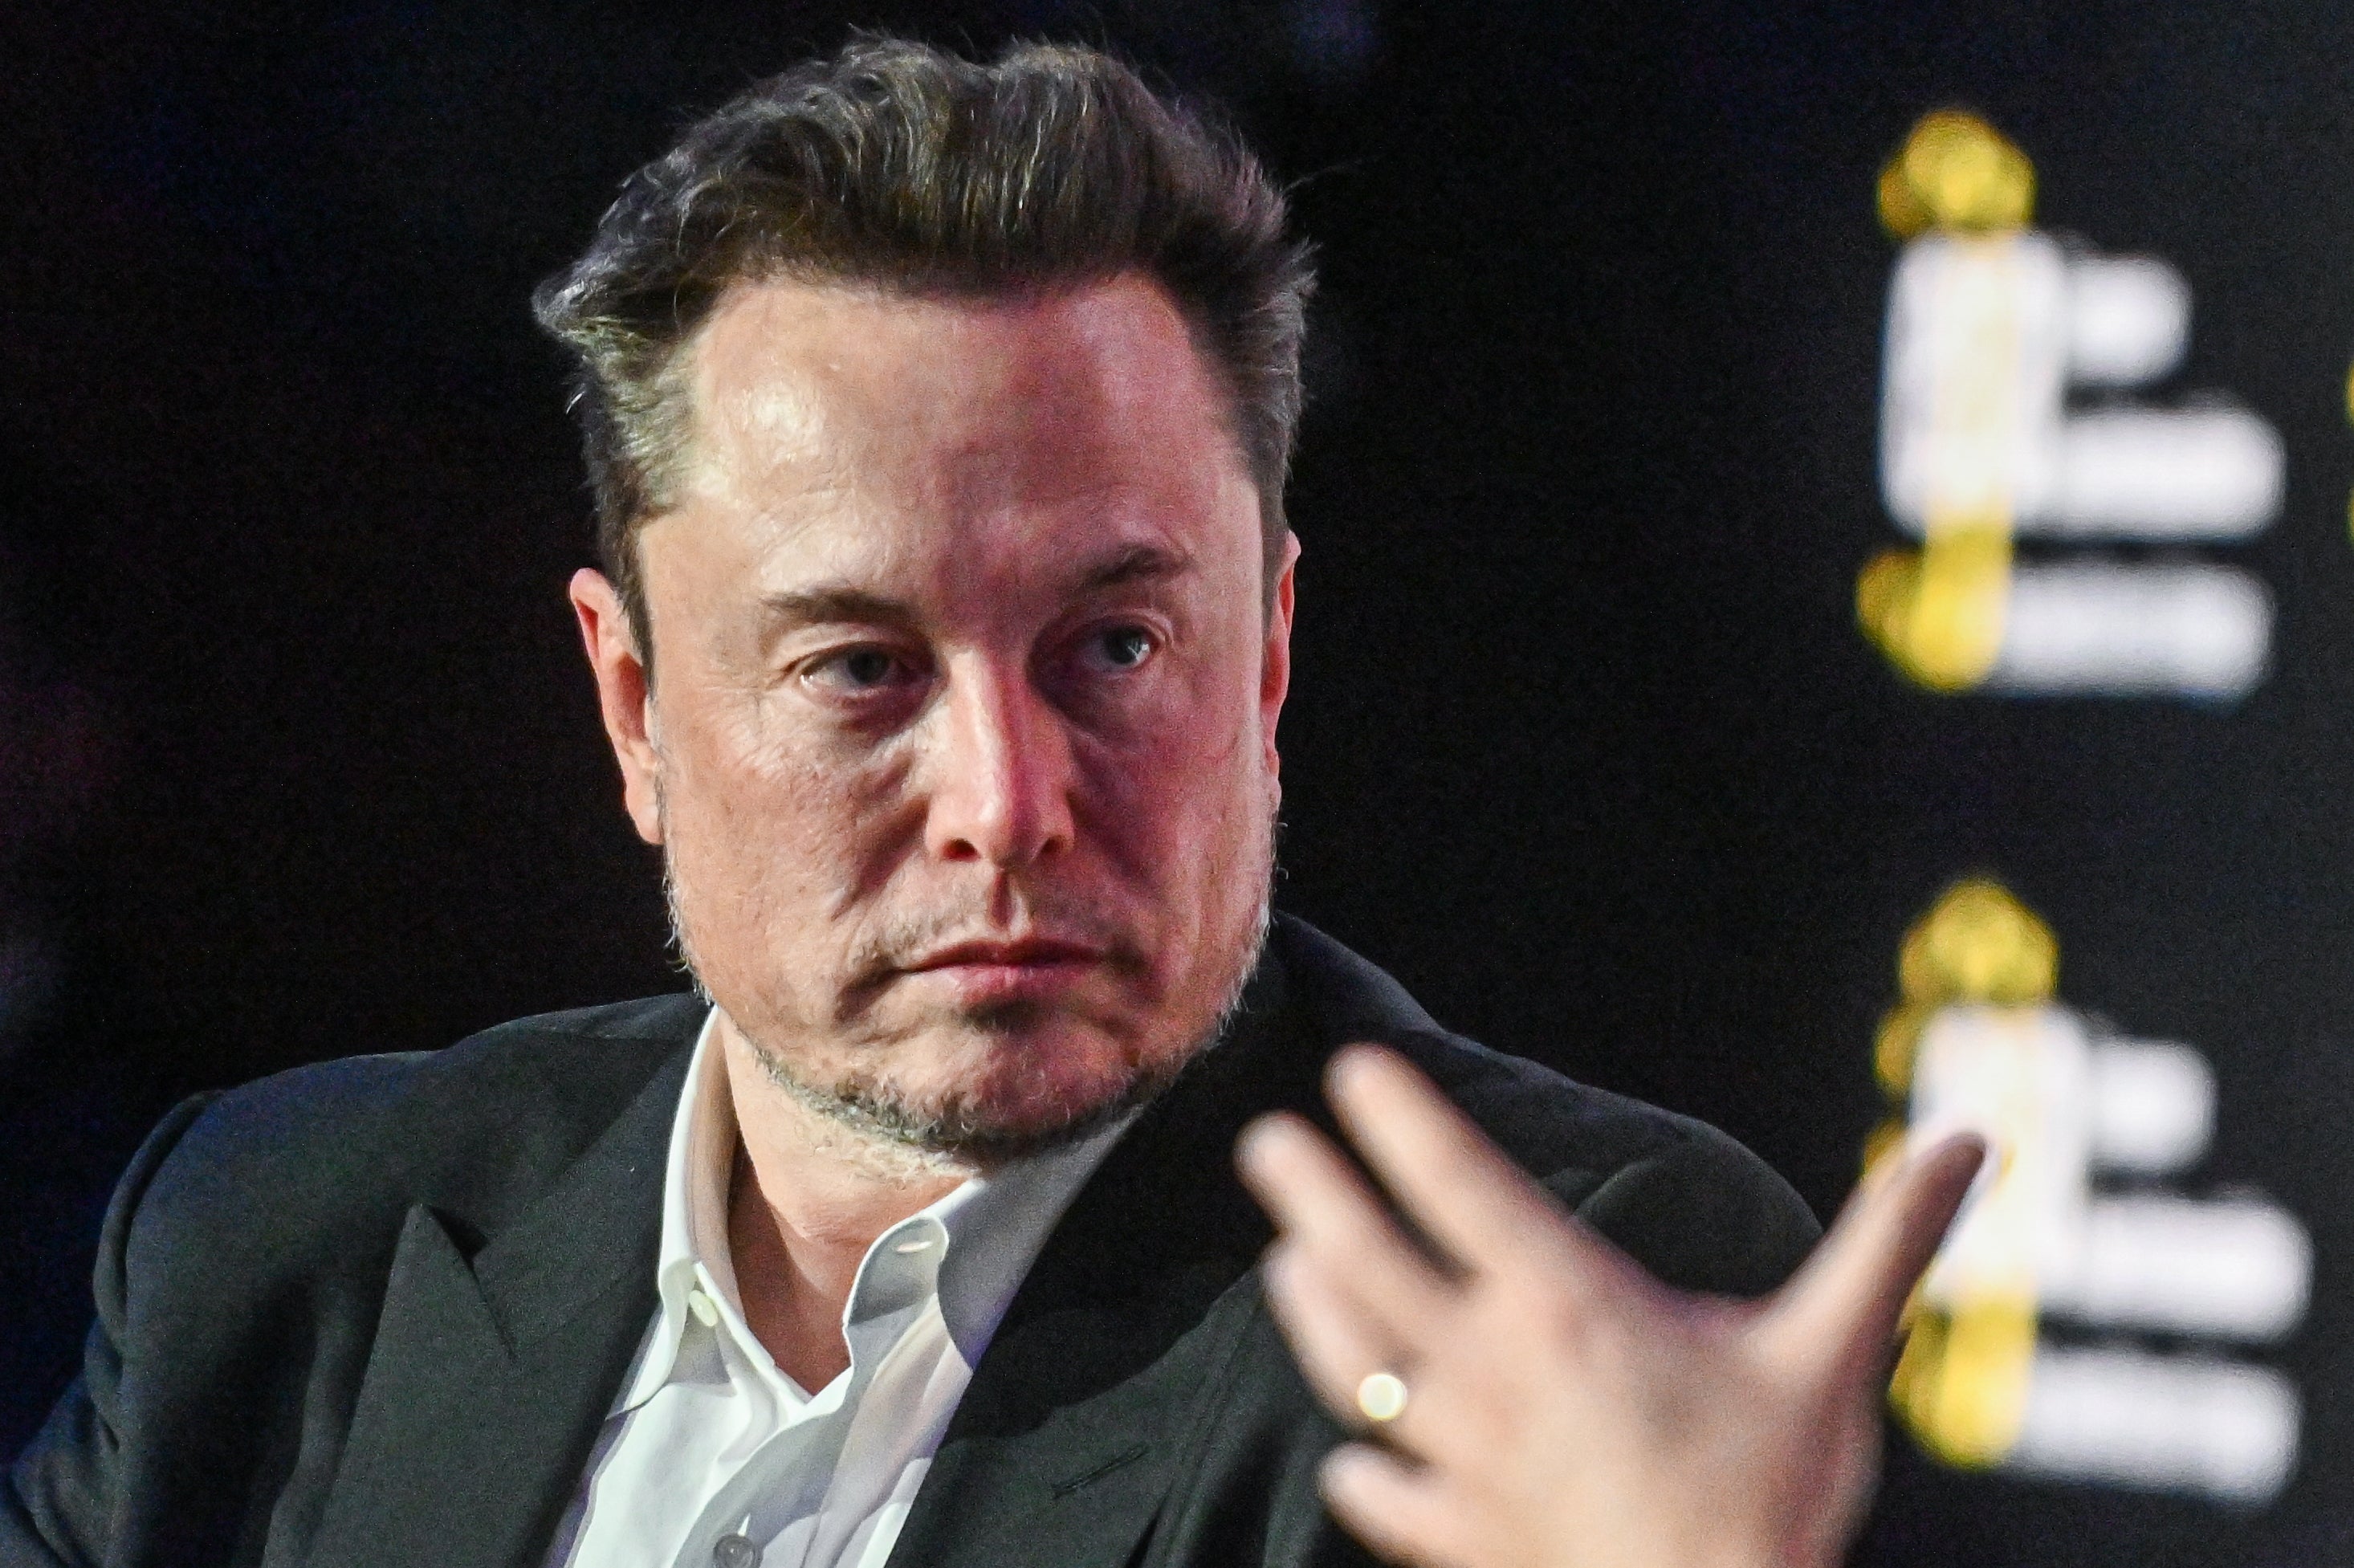 Elon Musk has admitted that he listens to podcasts about the fall of civilization at night time